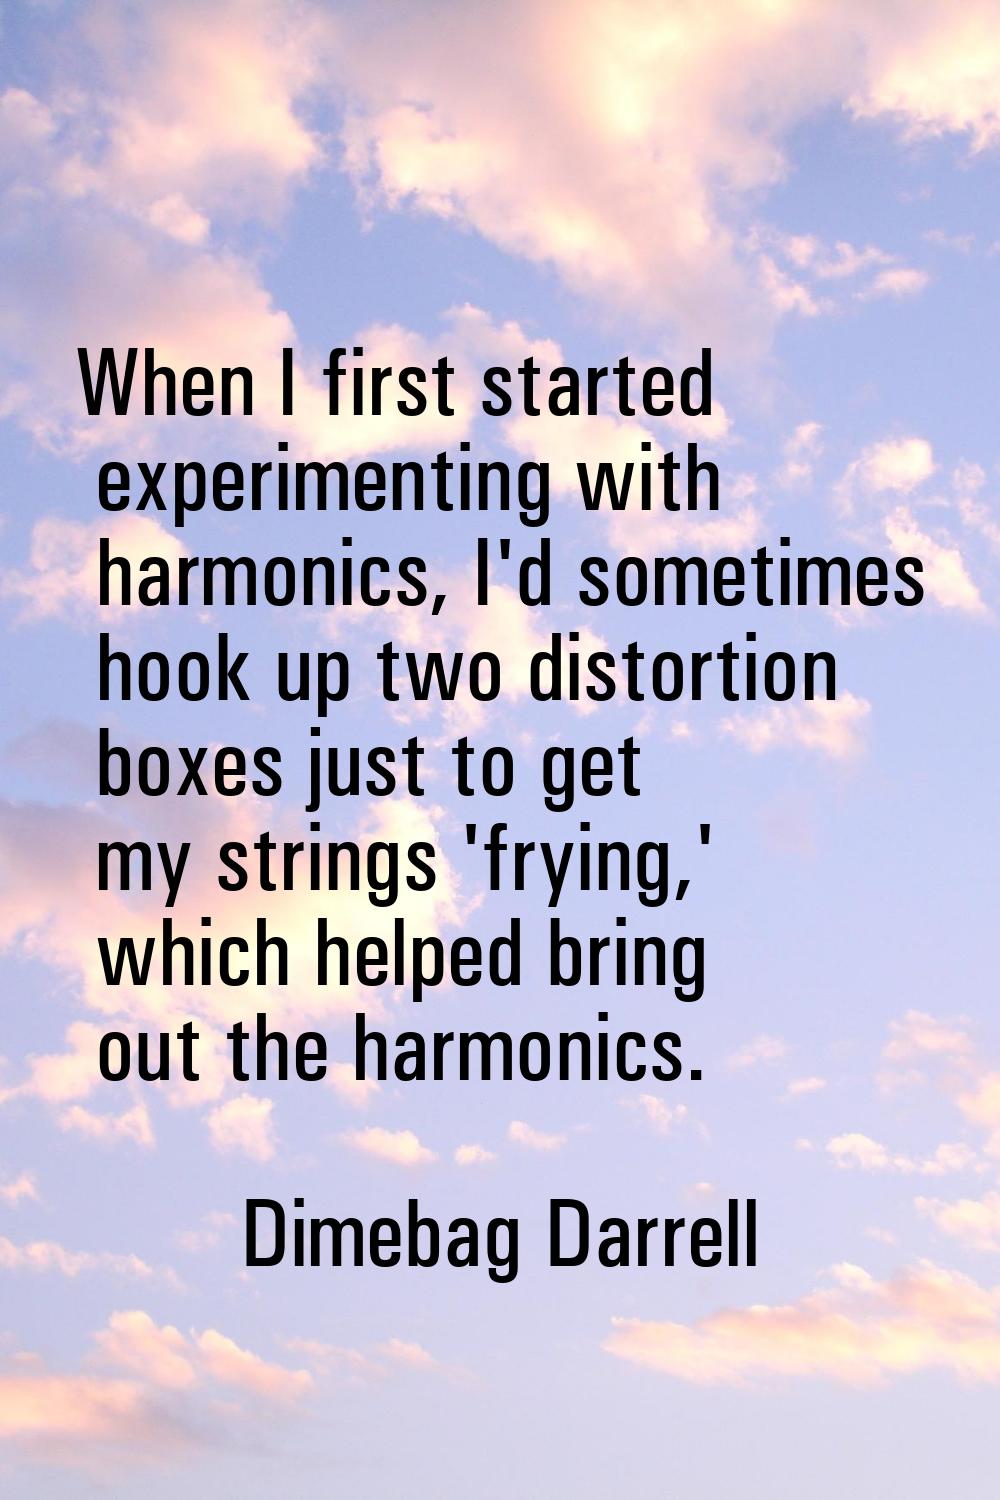 When I first started experimenting with harmonics, I'd sometimes hook up two distortion boxes just 